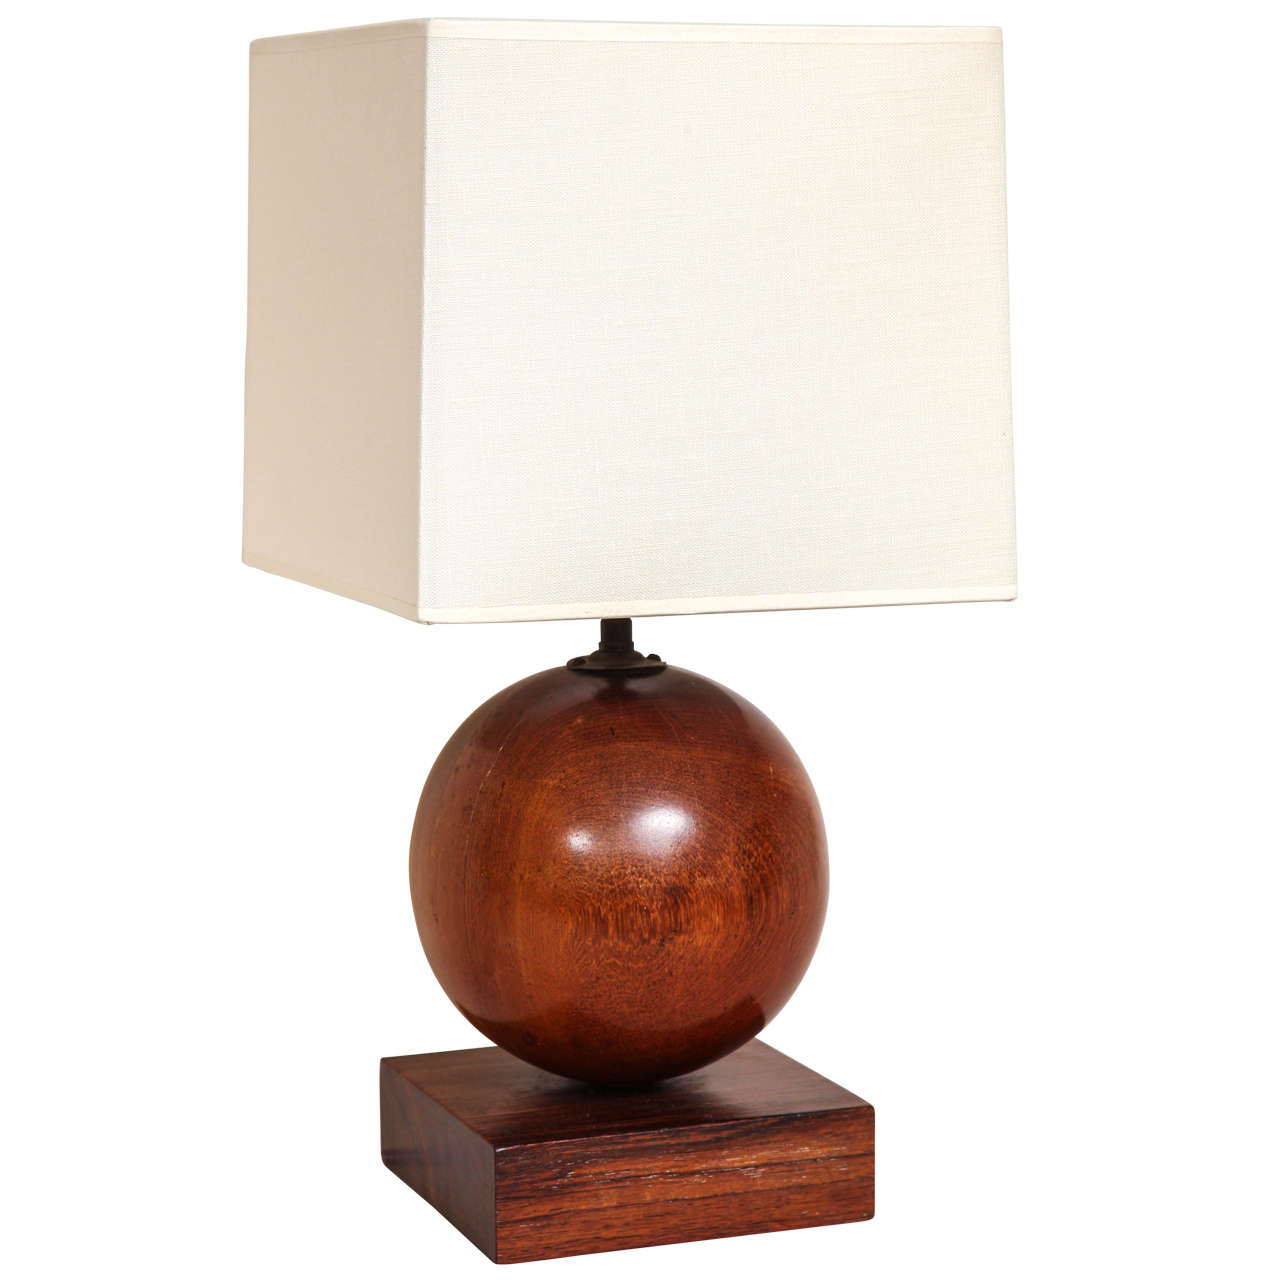 Ernest Boiceau French Art Deco Rosewood Lamp